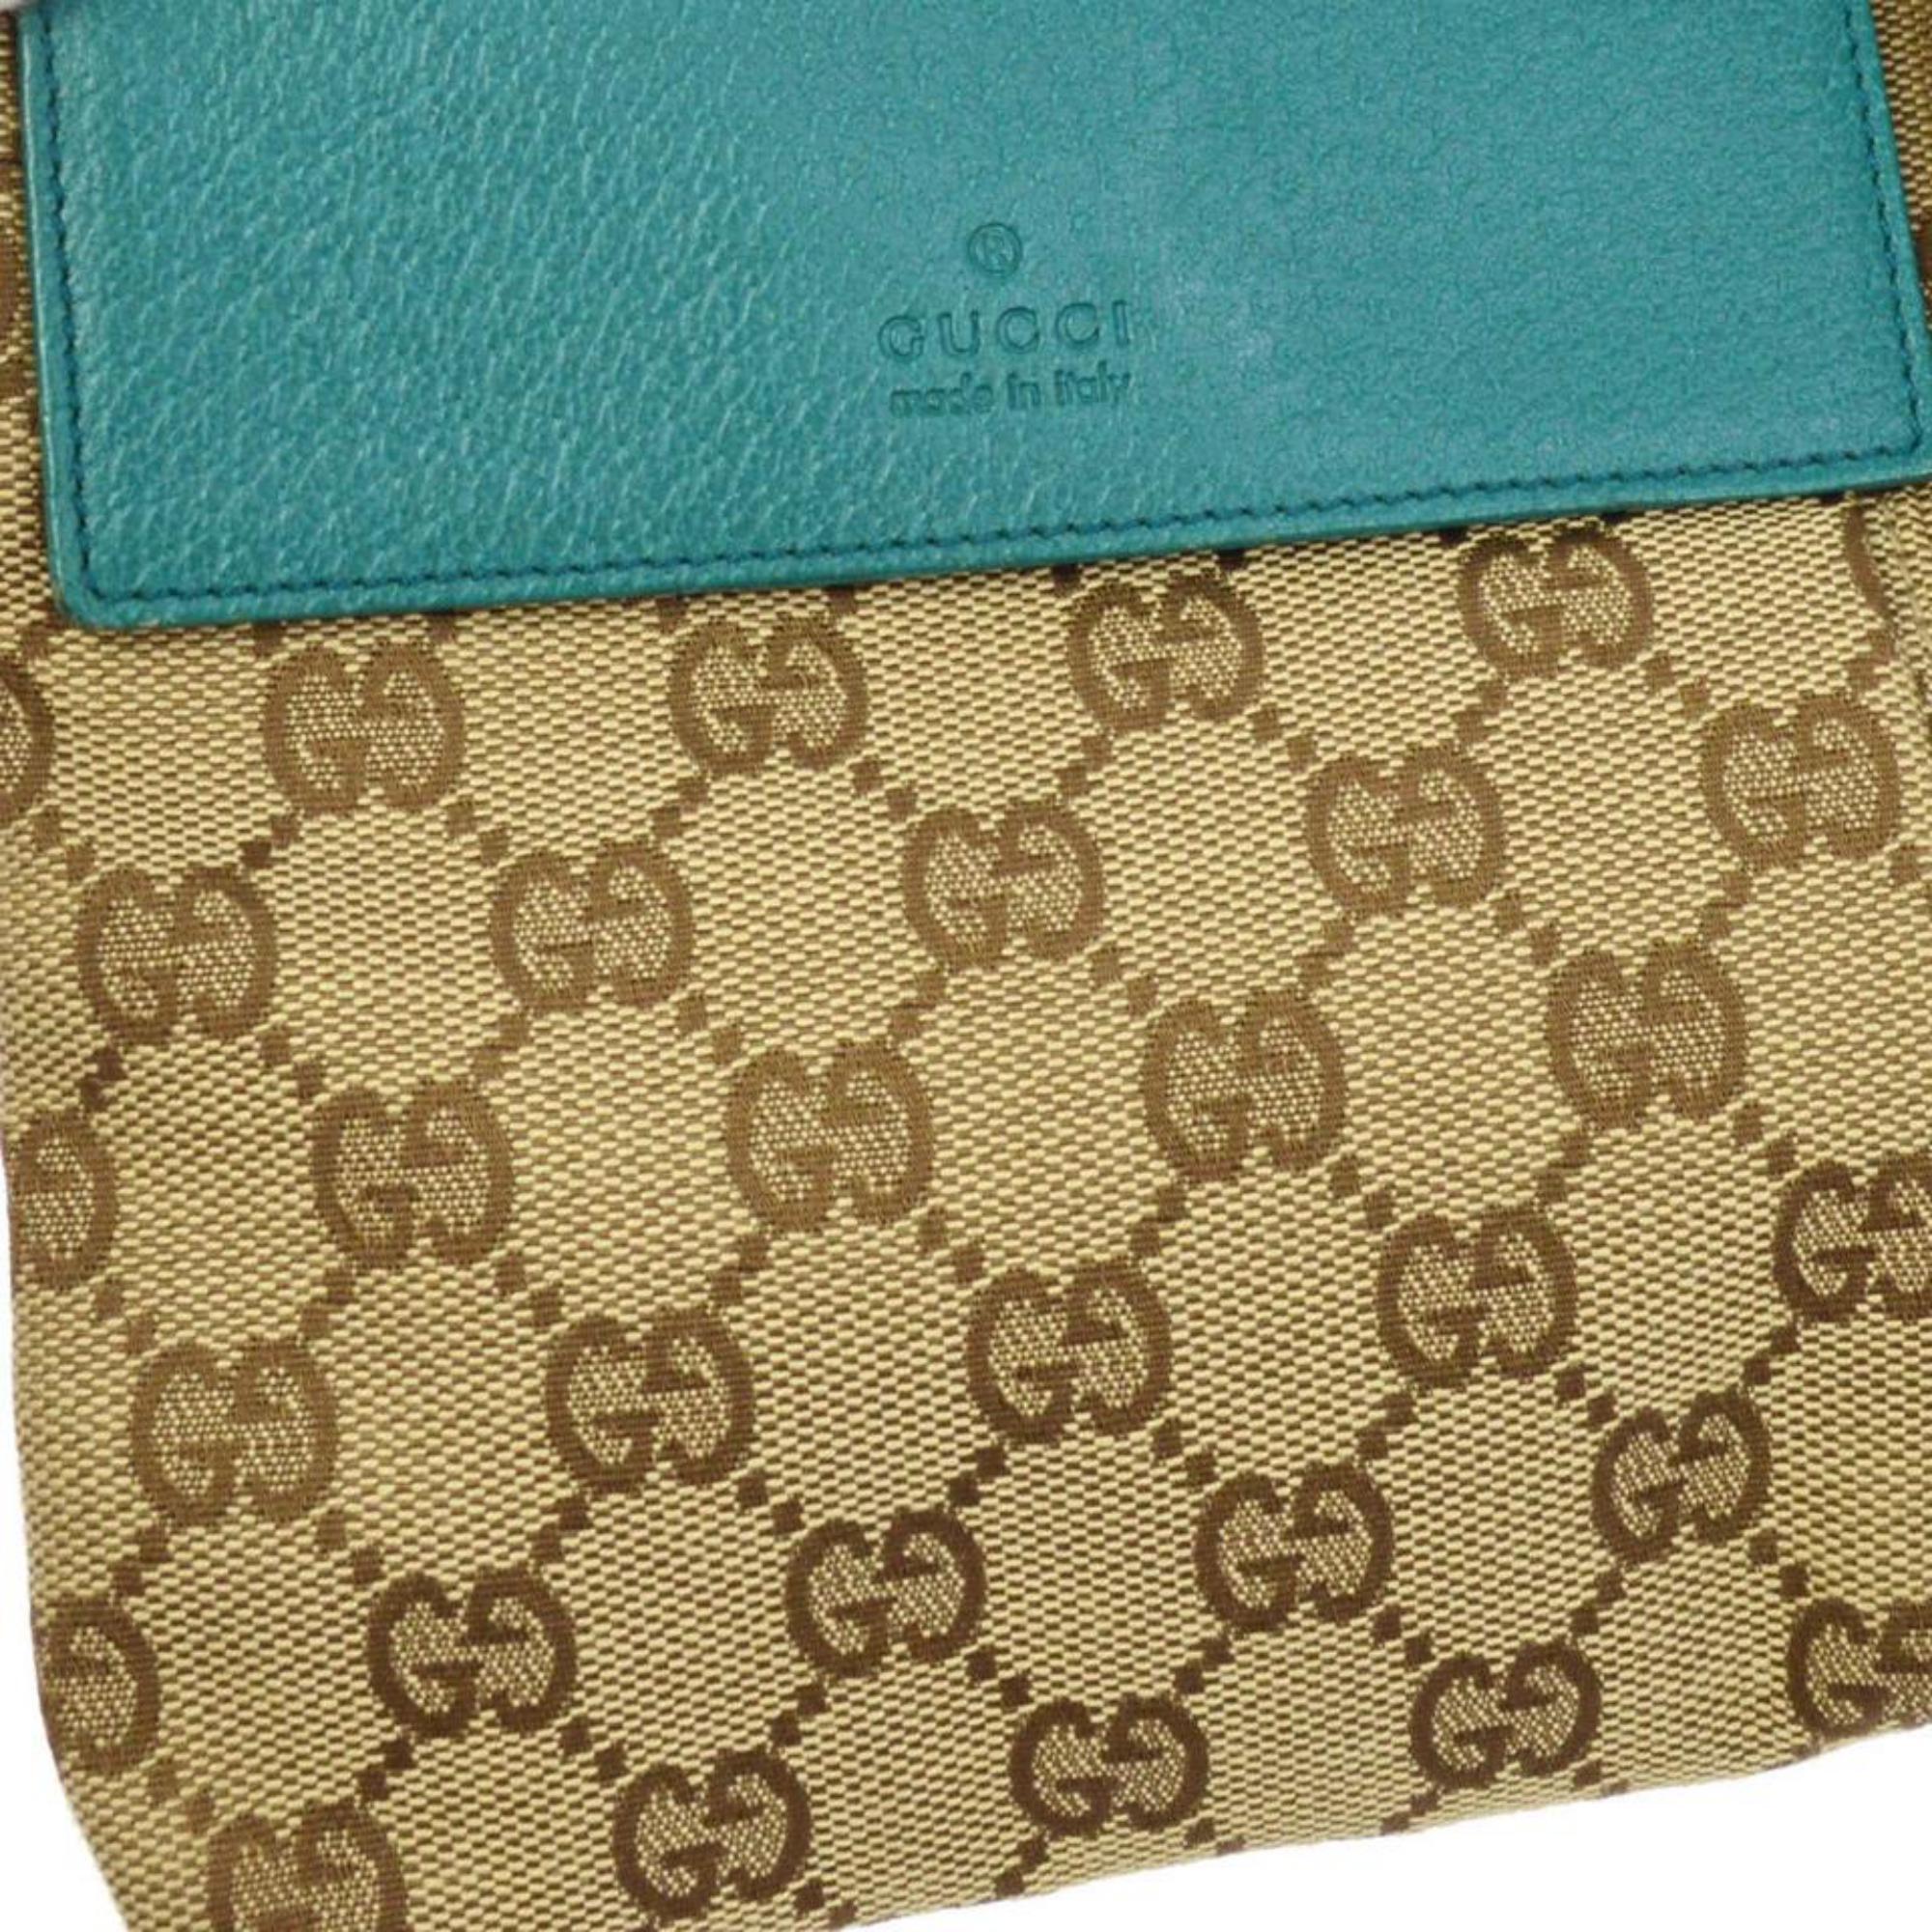 Gucci (Ultra Rare) Gg Bum Waist Pouch 866840 Beige Coated Canvas Cross Body Bag For Sale 4